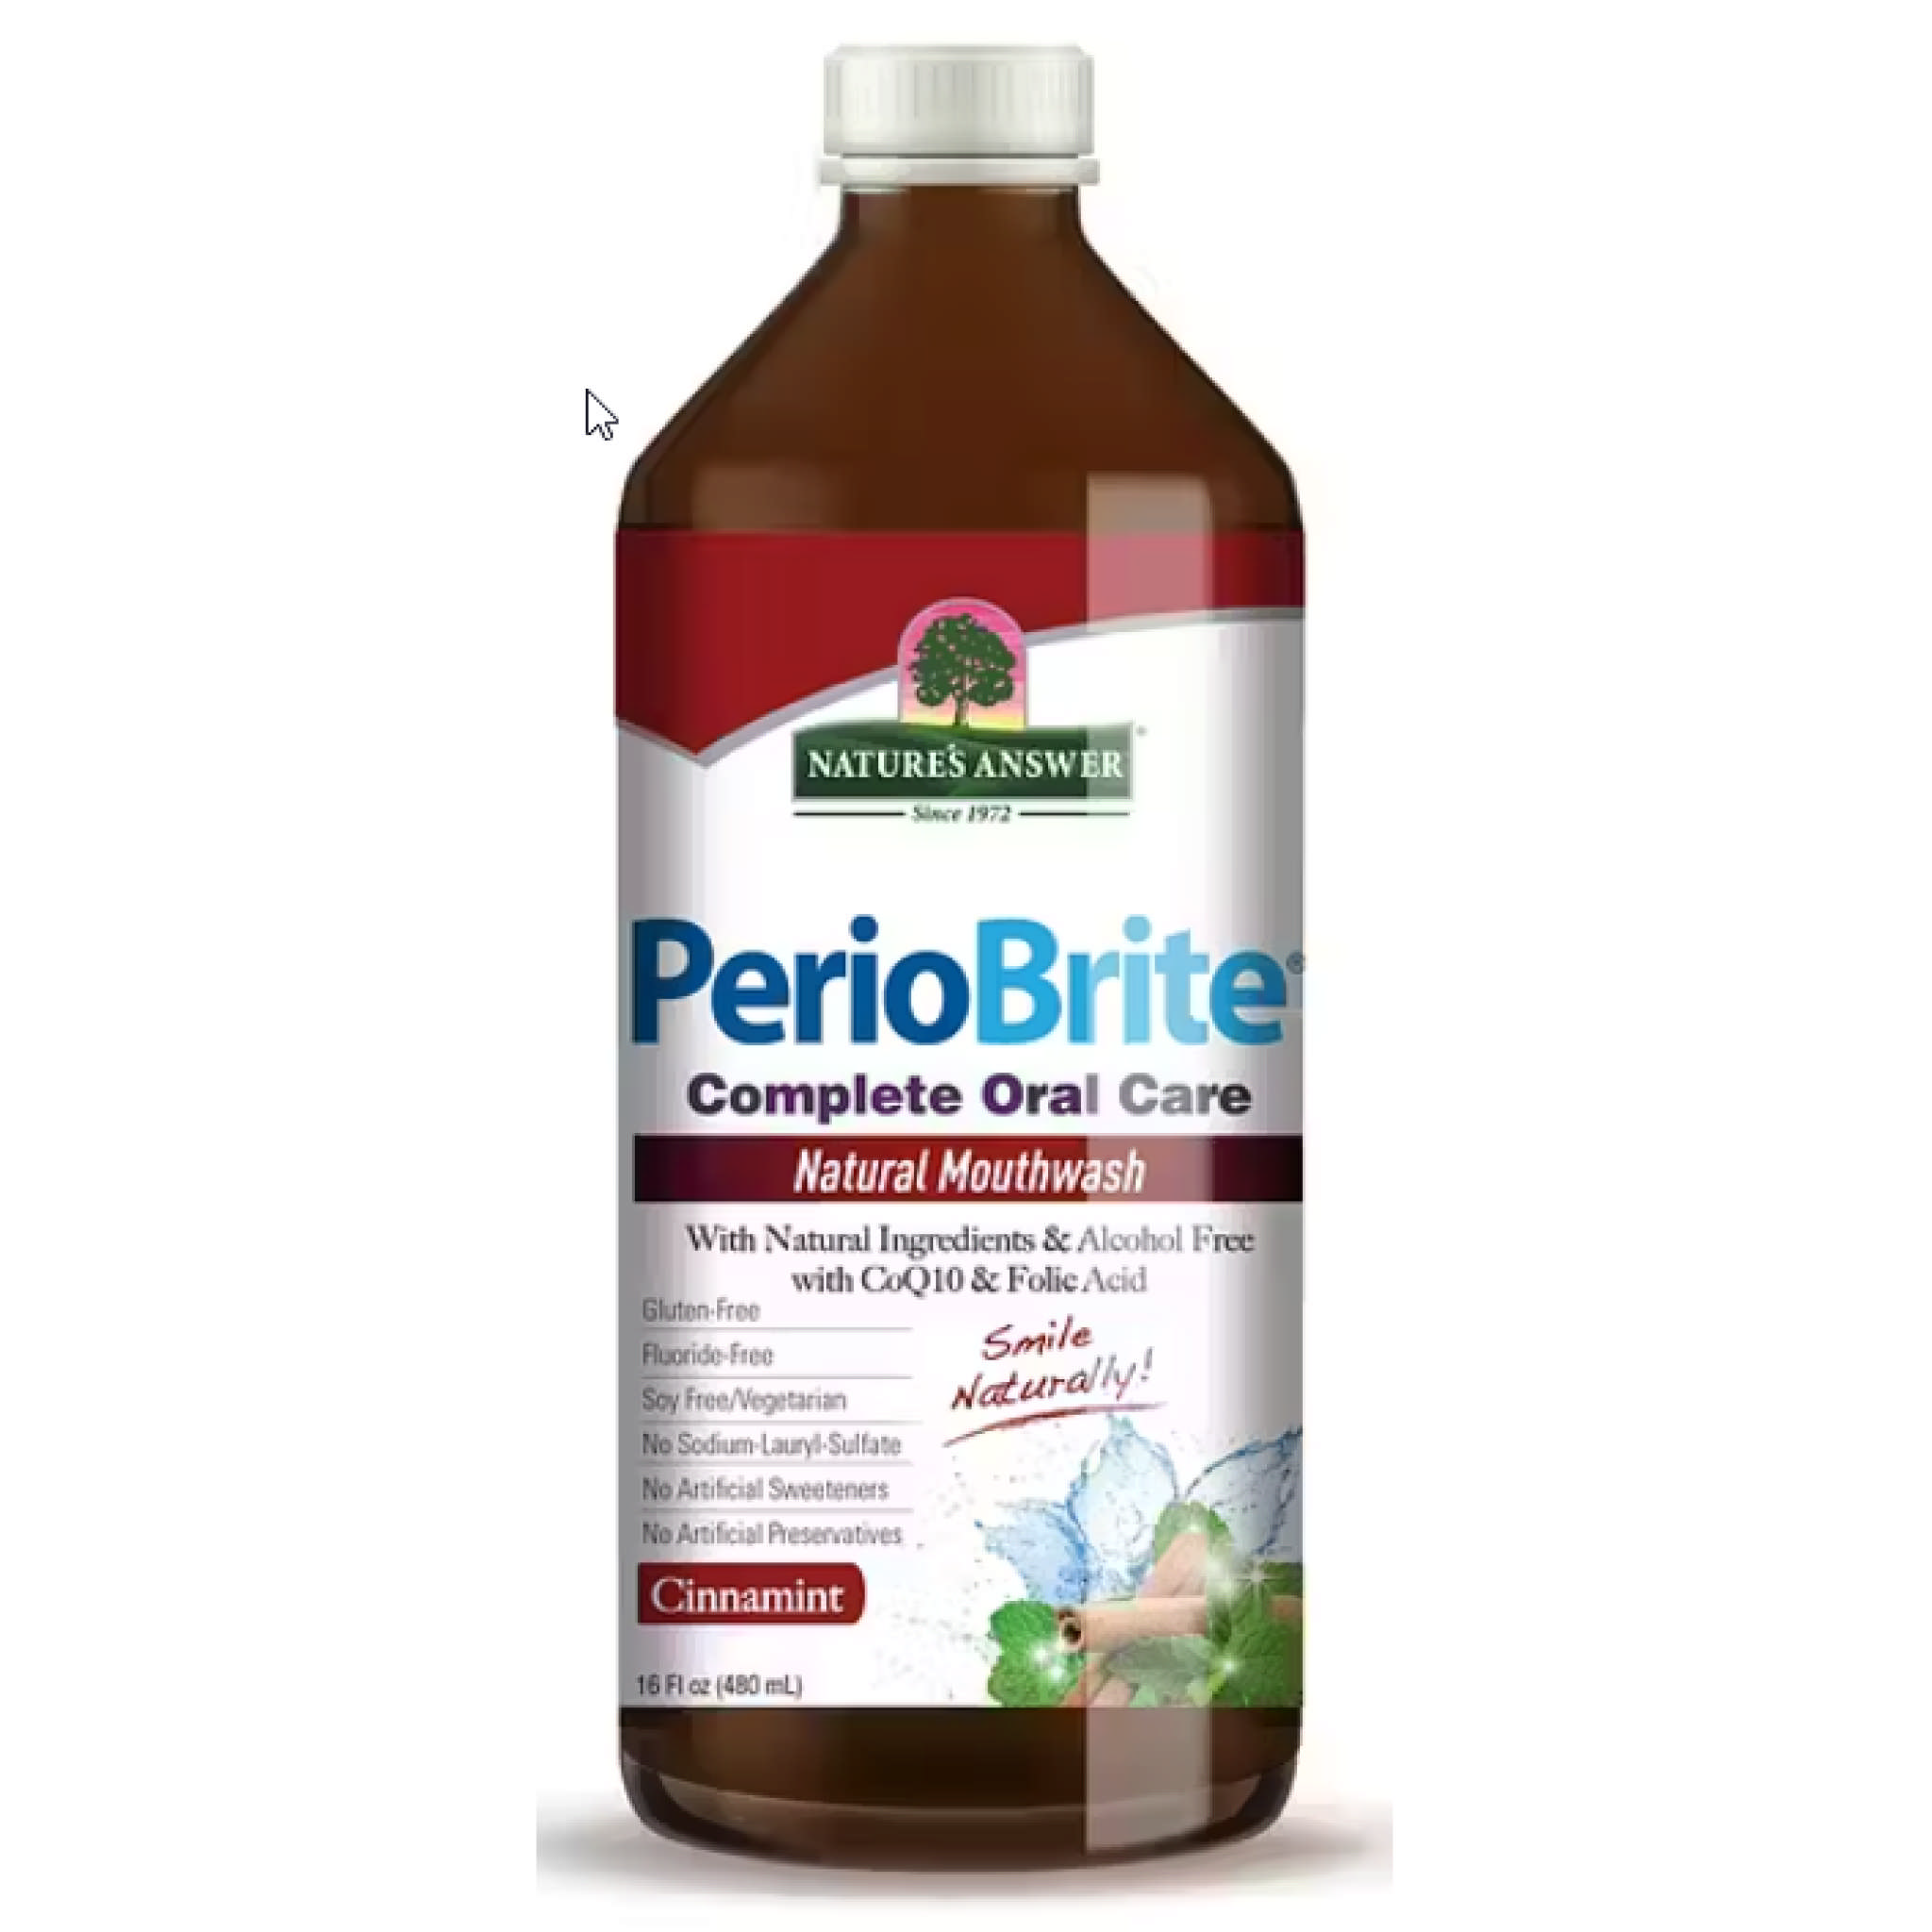 Natures Answer - Periobrite Cinnamint